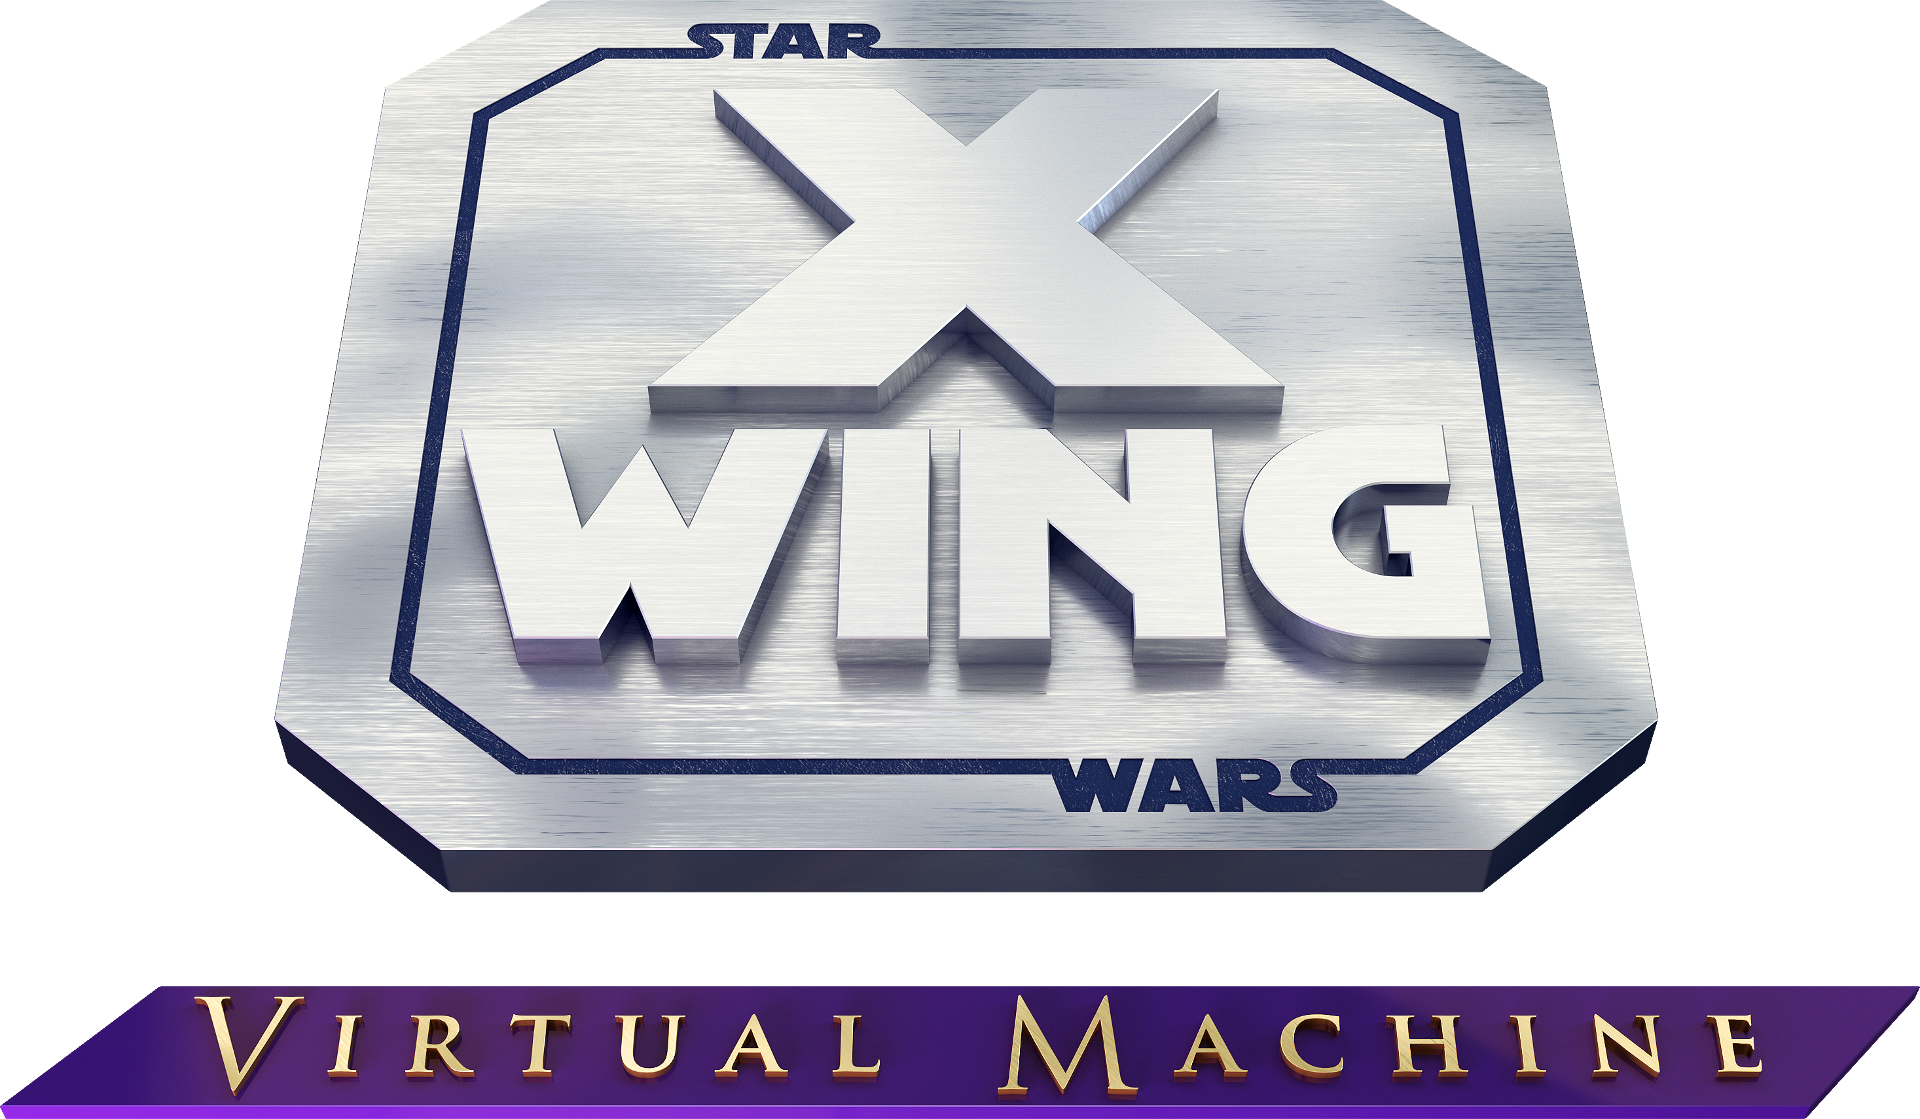 Fighter Battlefront Brand Wars Vs Xwing Tie PNG Image